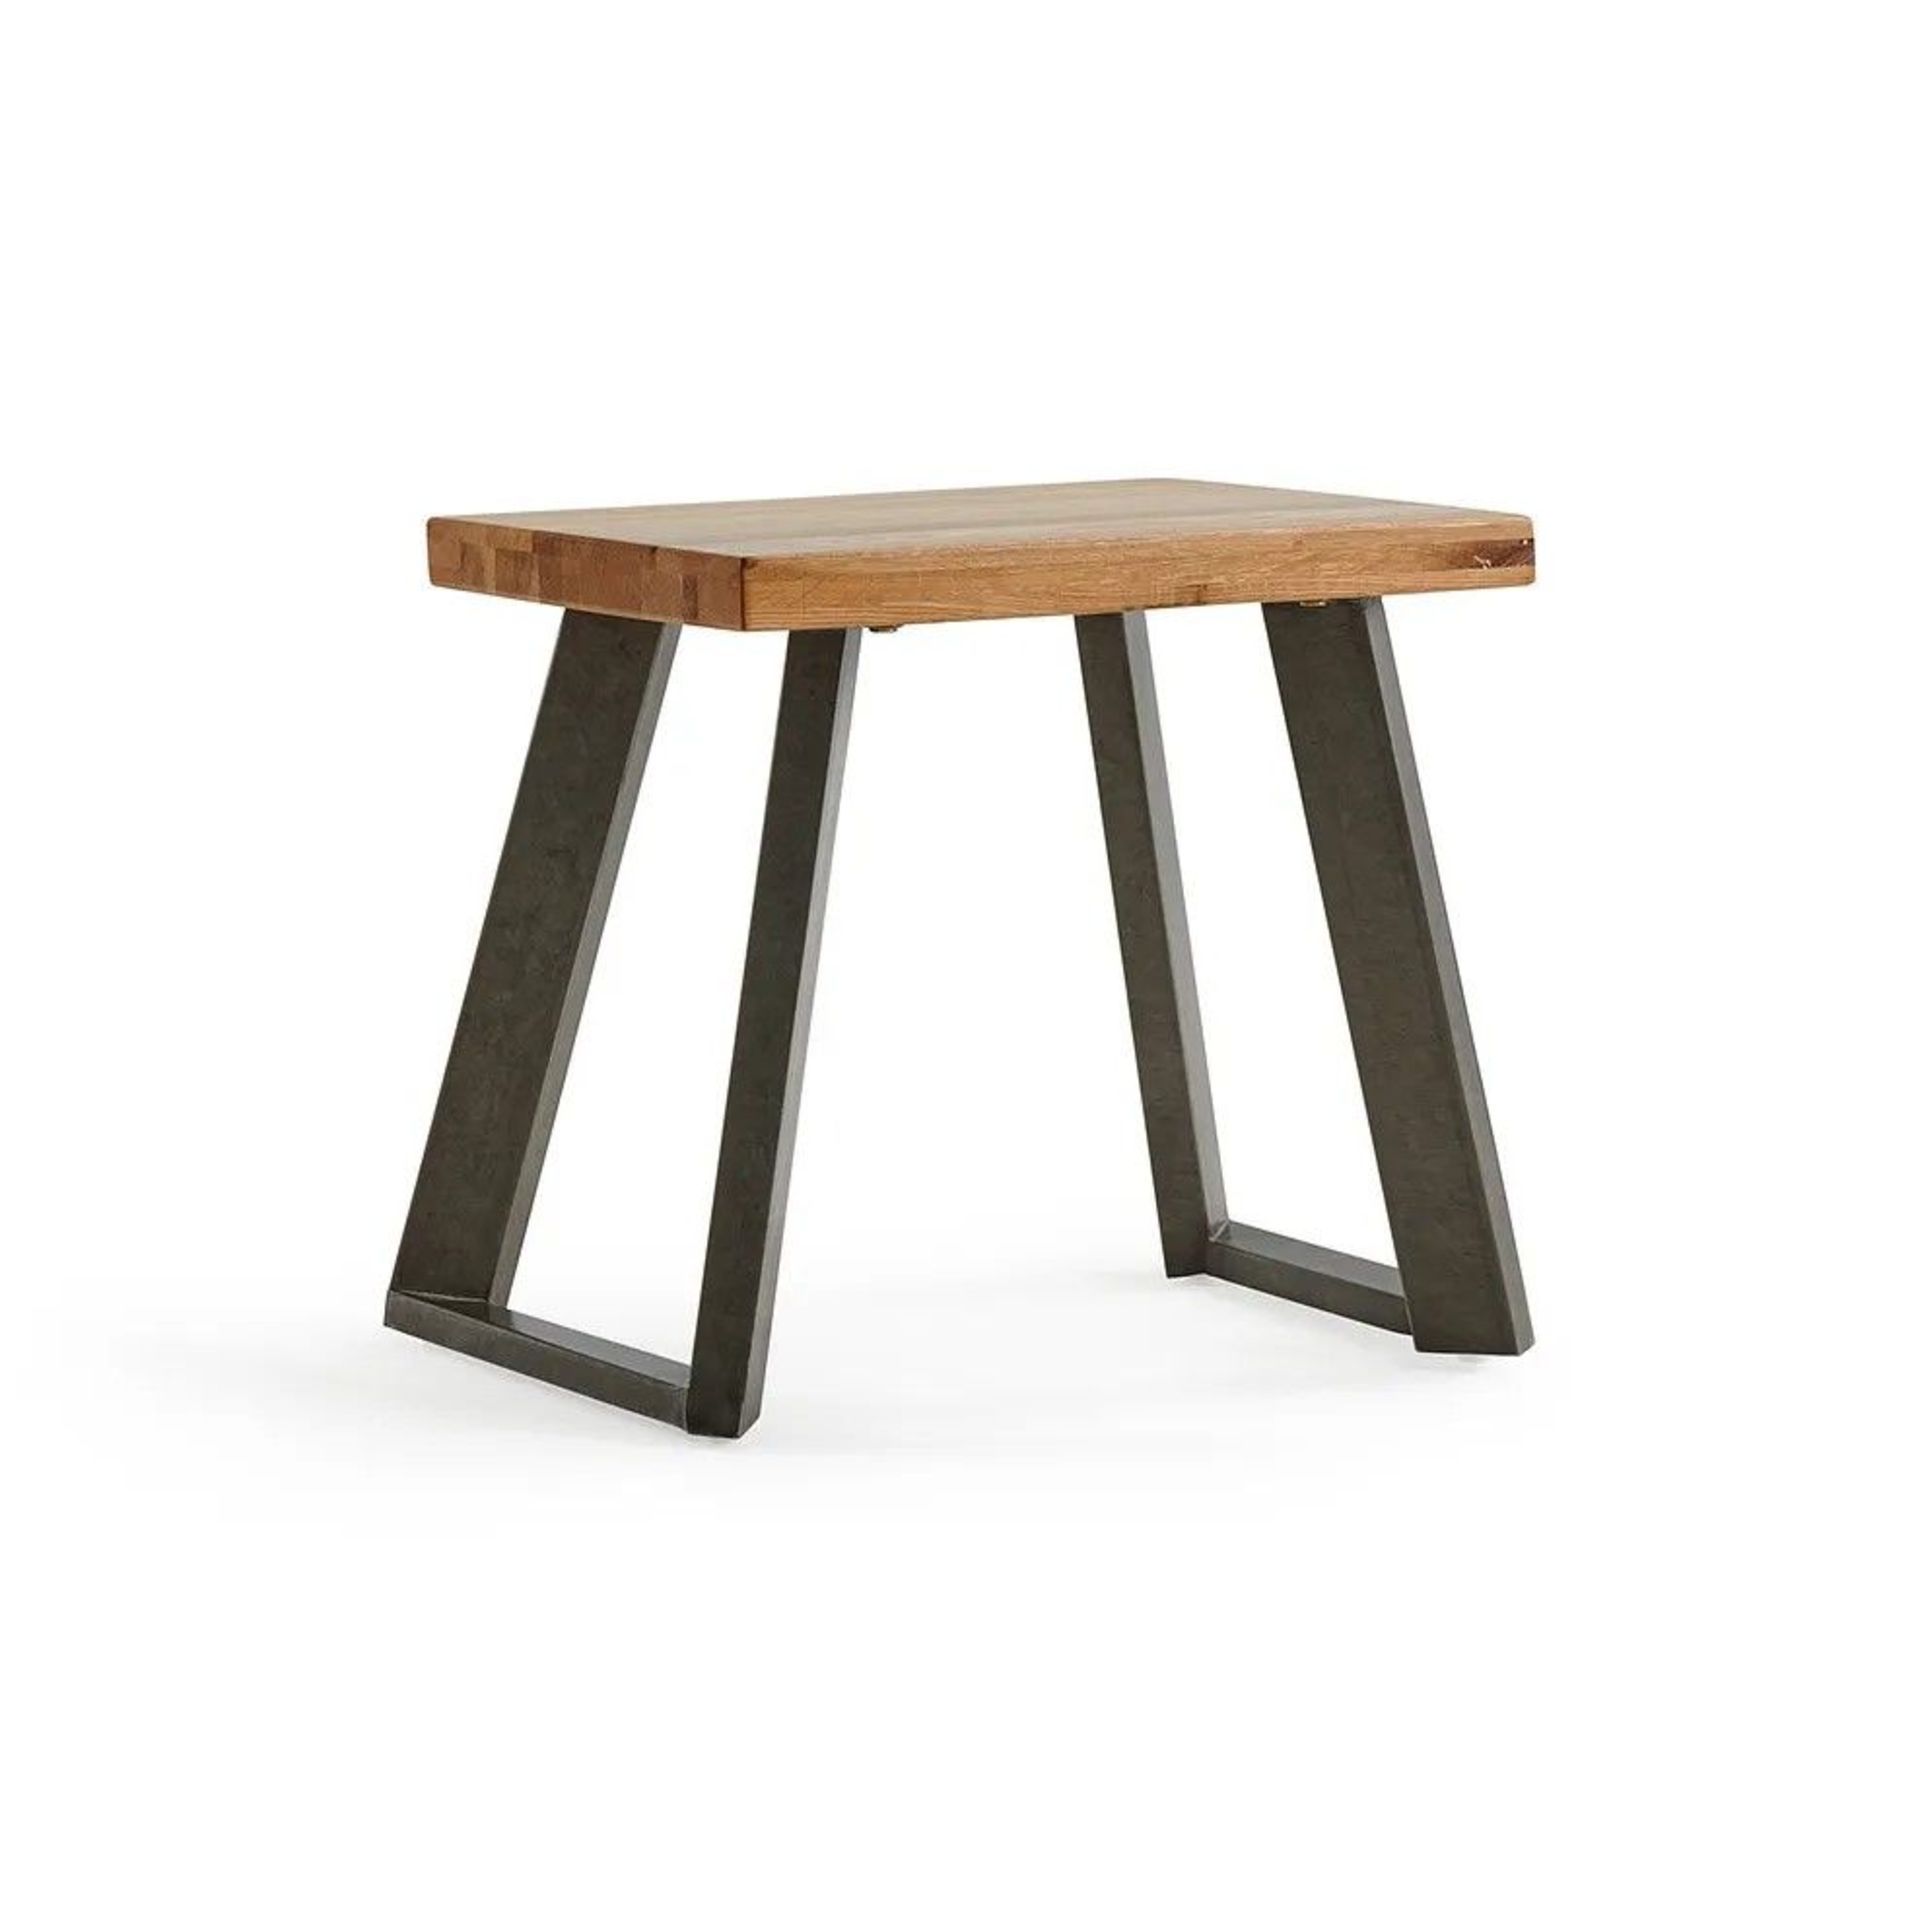 NEW BOXED Cantelever Natural Solid Oak & Metal Stool. RRP £130 EACH For a more open seating